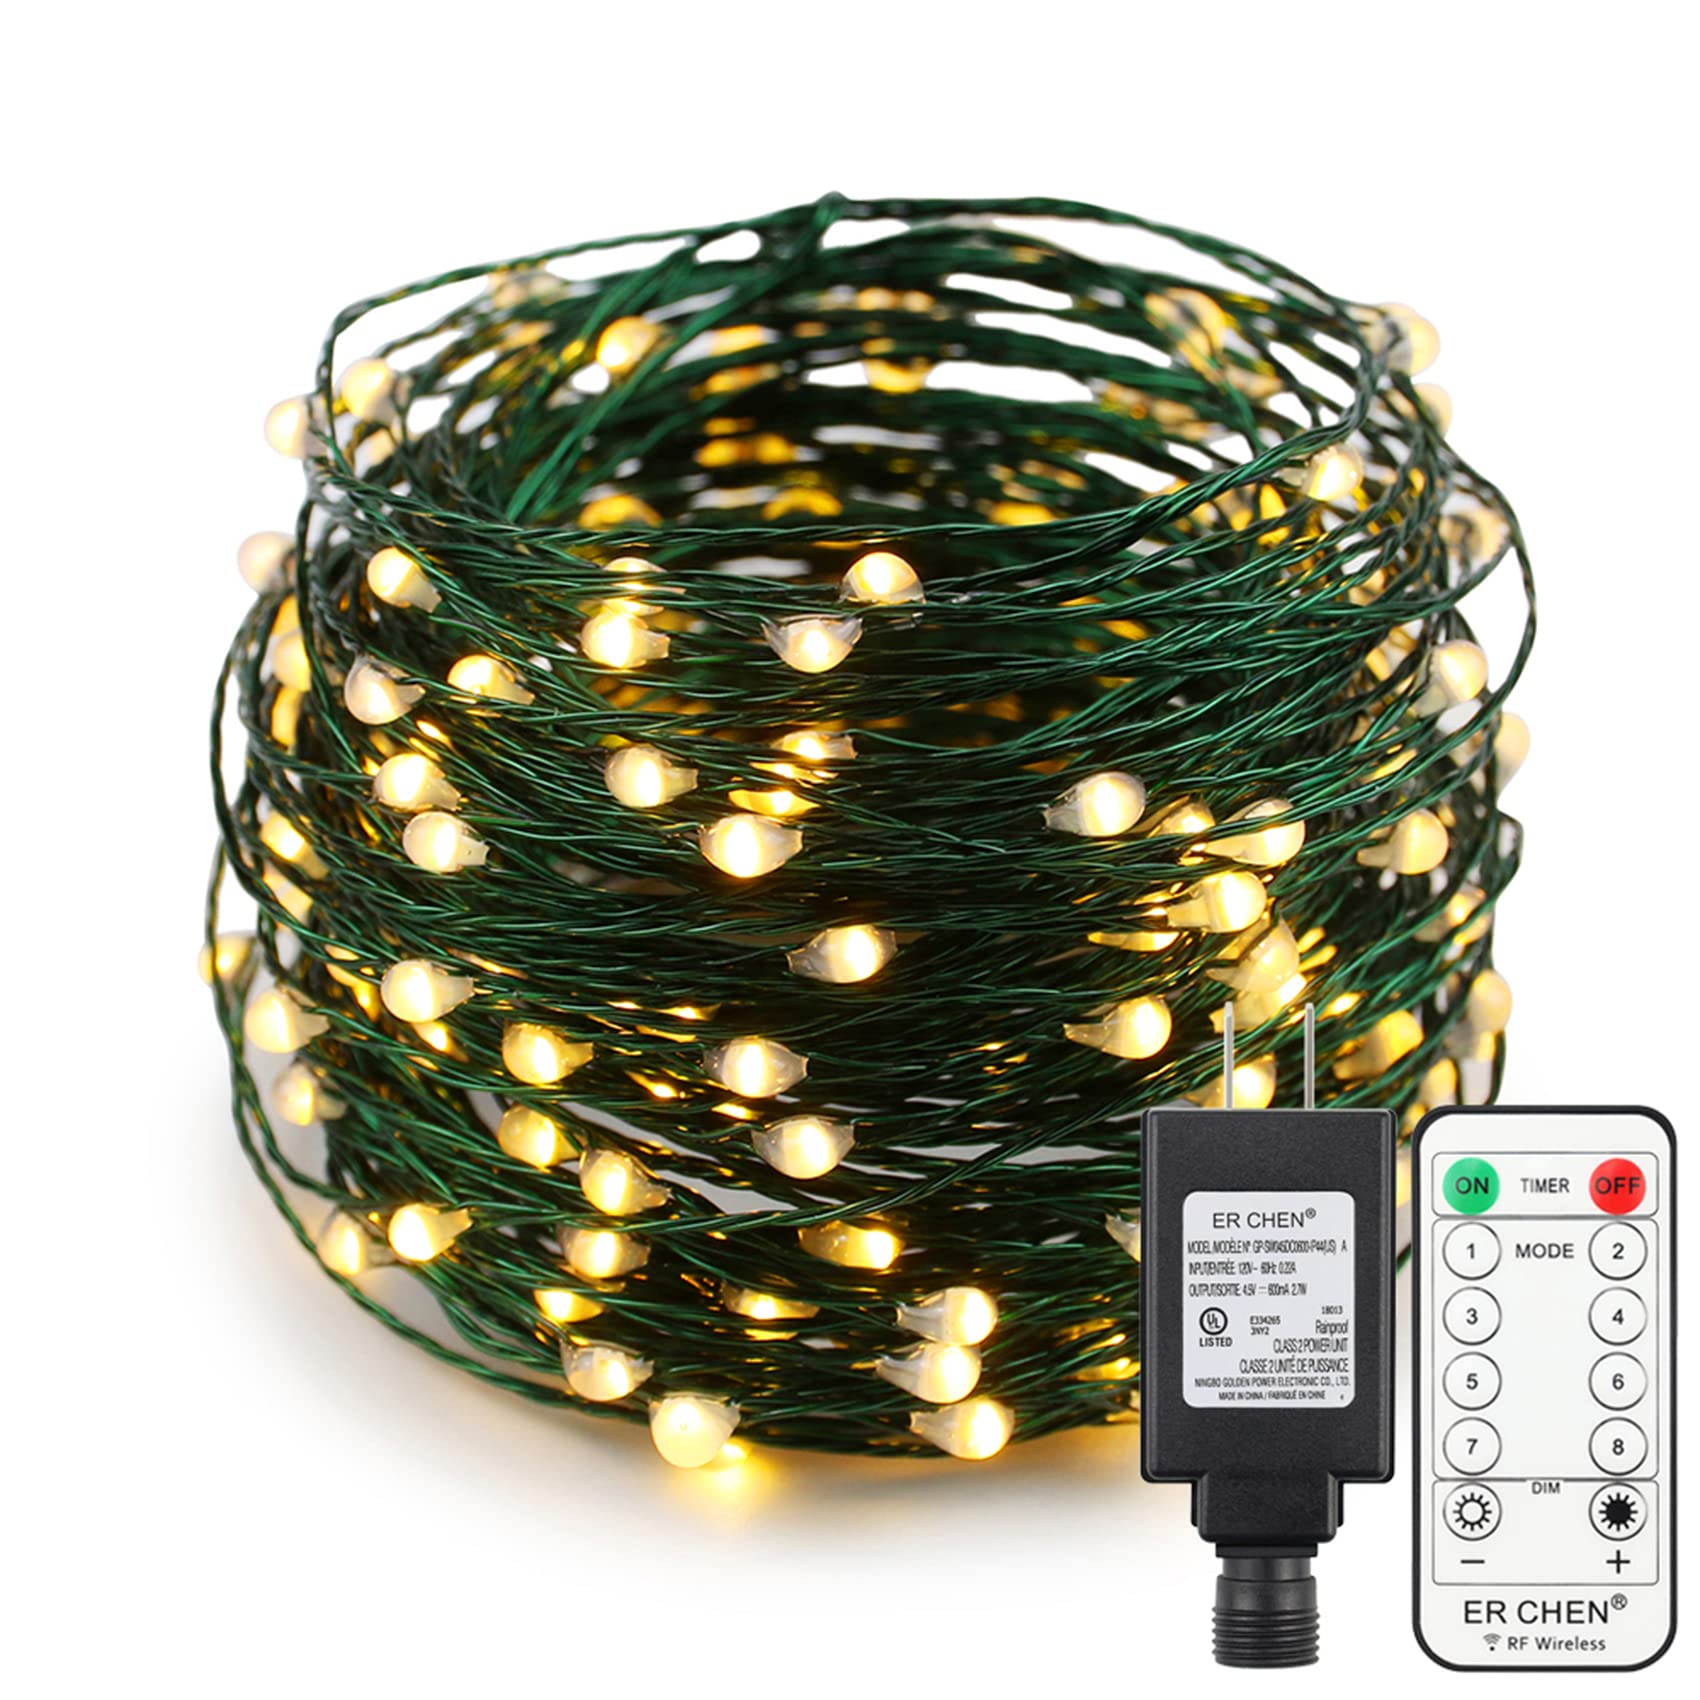 ER CHEN 66ft Led String Lights, 200 Led Starry Lights on 20M Green Copper Wire String Lights Power Adapter + Remote Control(Warm